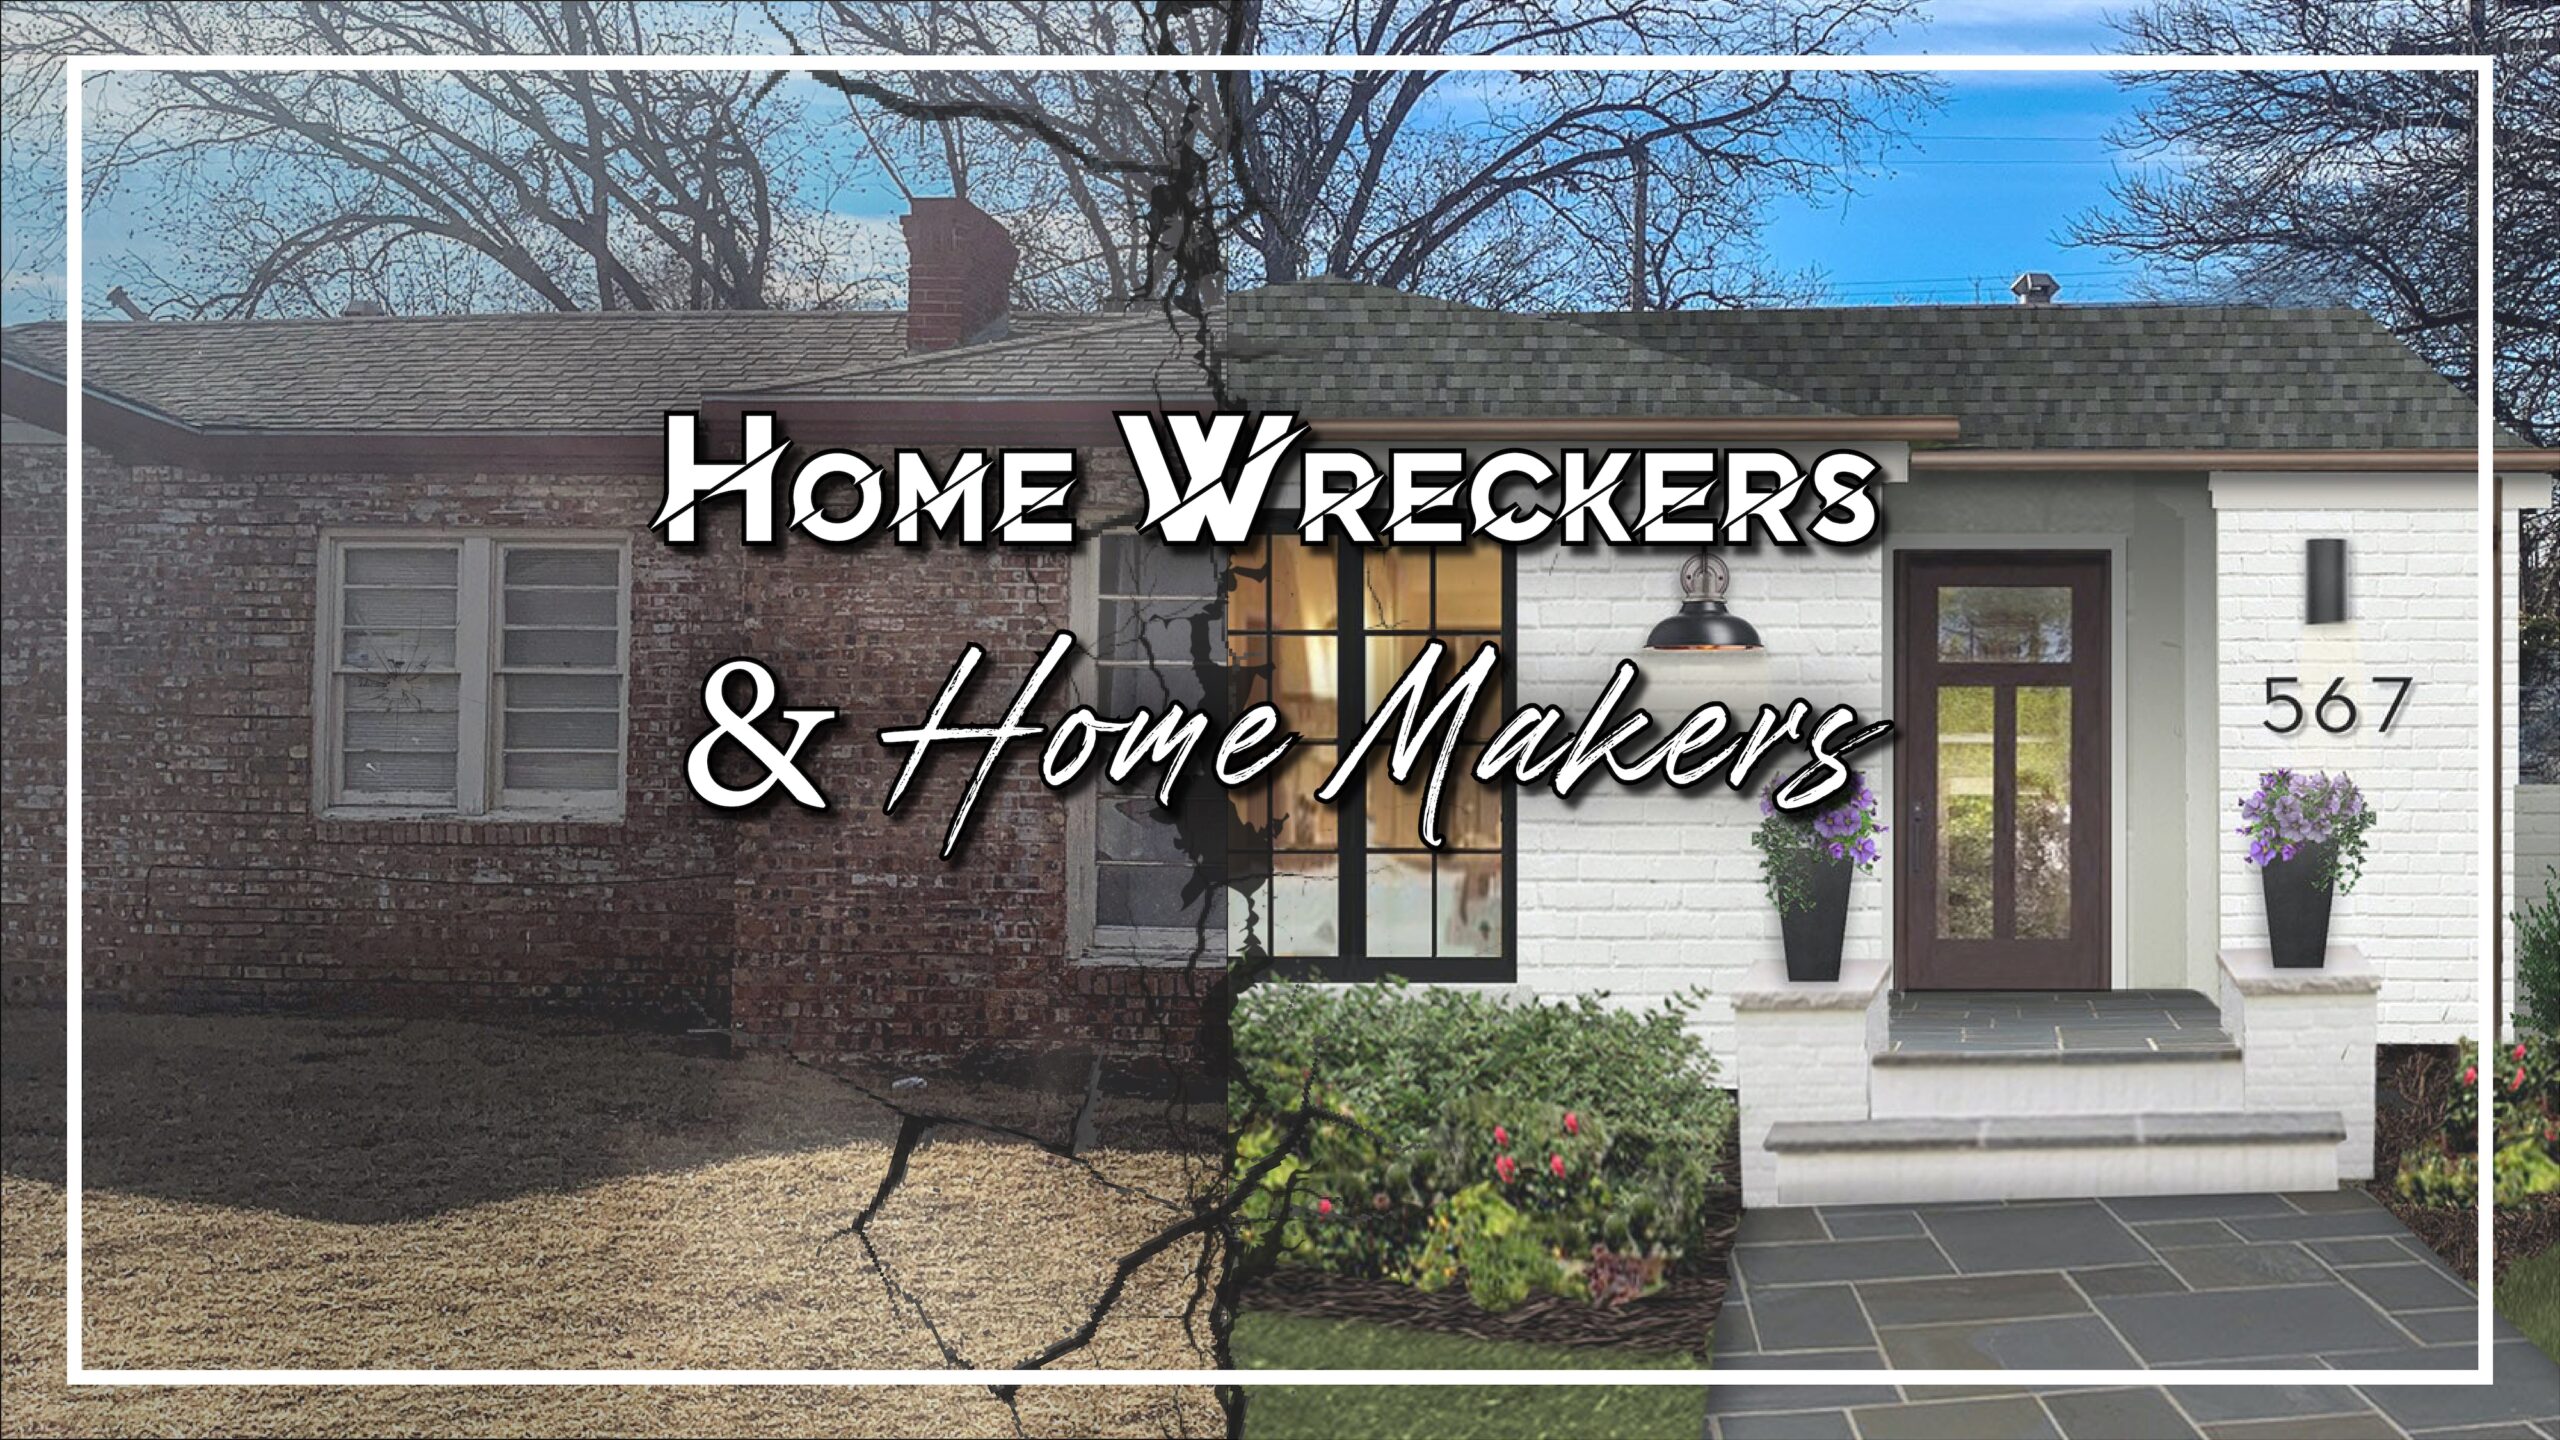 Home Wreckers & Home Makers